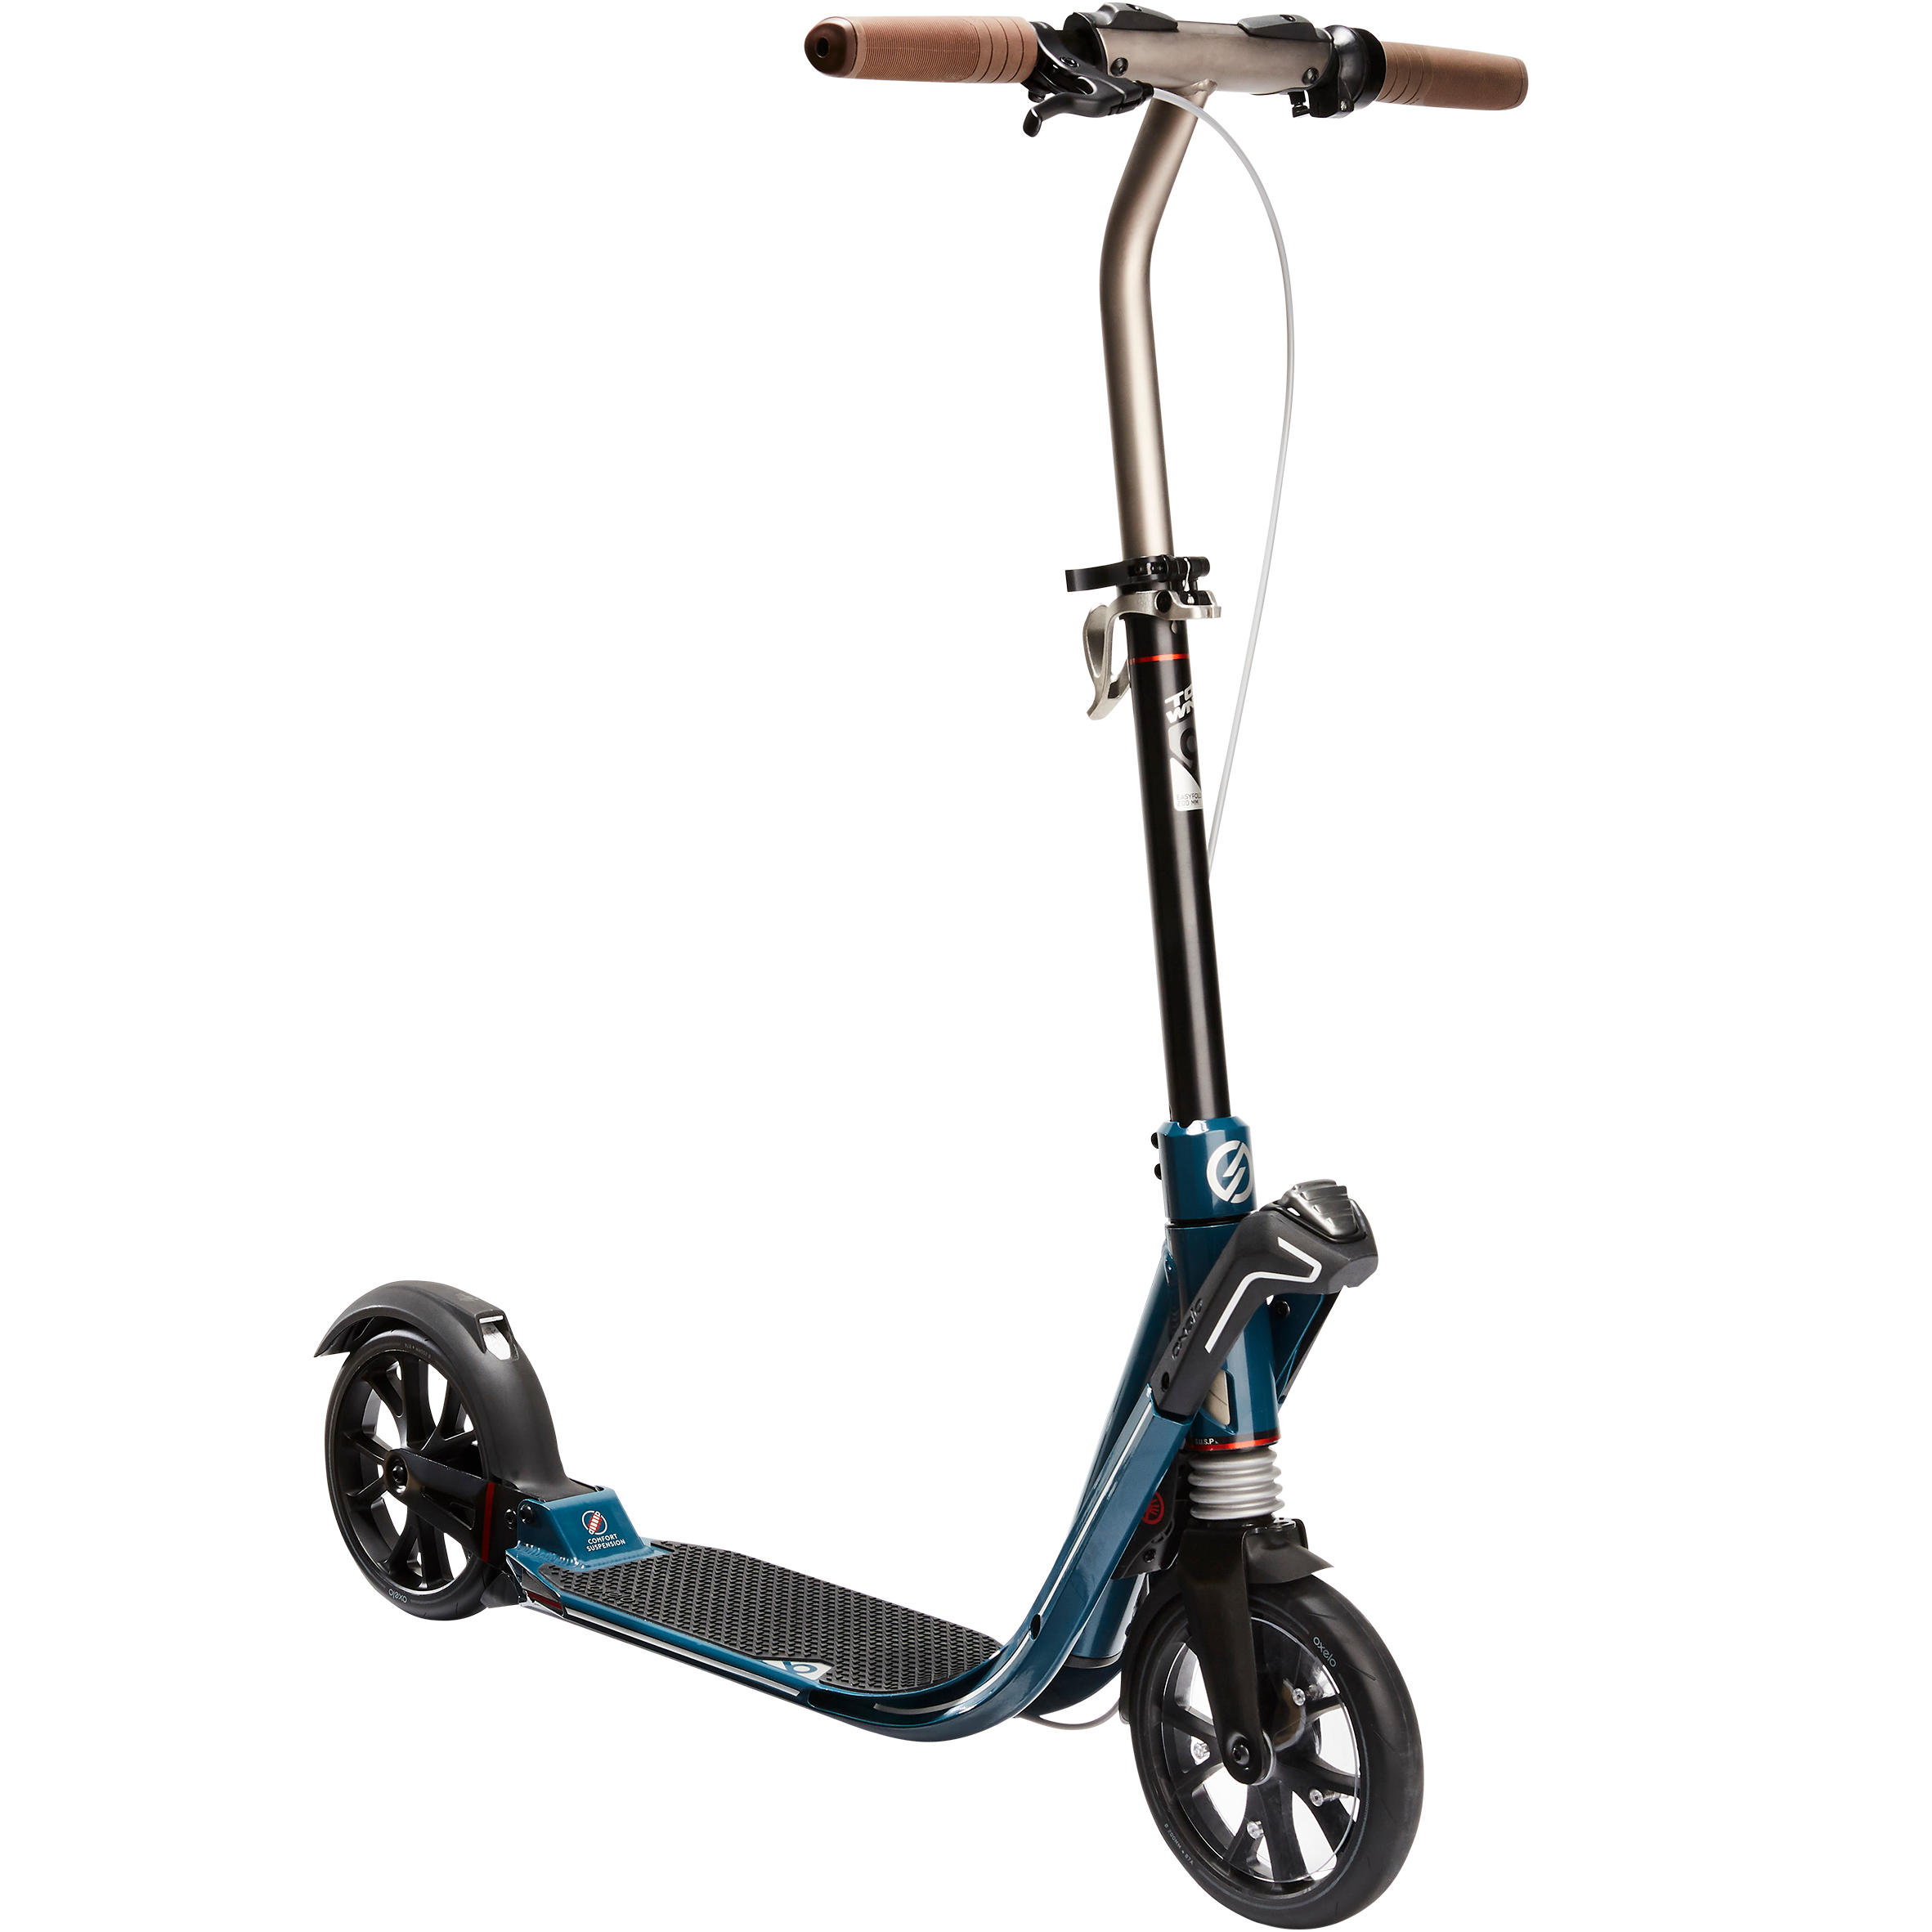 Town 9 EF V2 Adult Scooter OXELO 